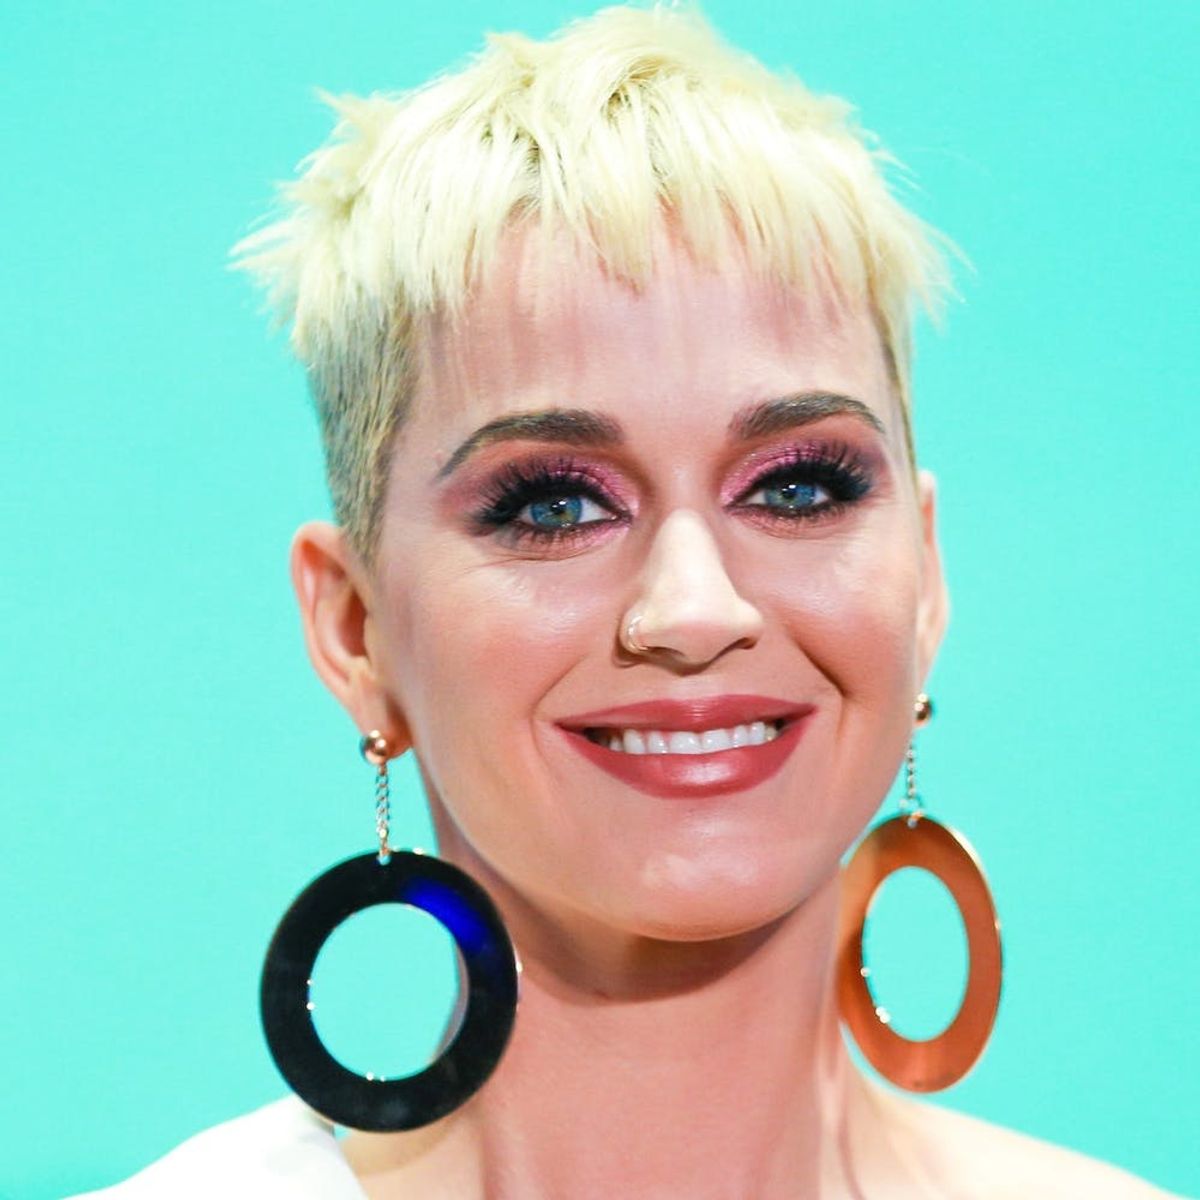 Katy Perry Wearing an Orlando Bloom Onesie Is the Best Thing You’ll See All Day